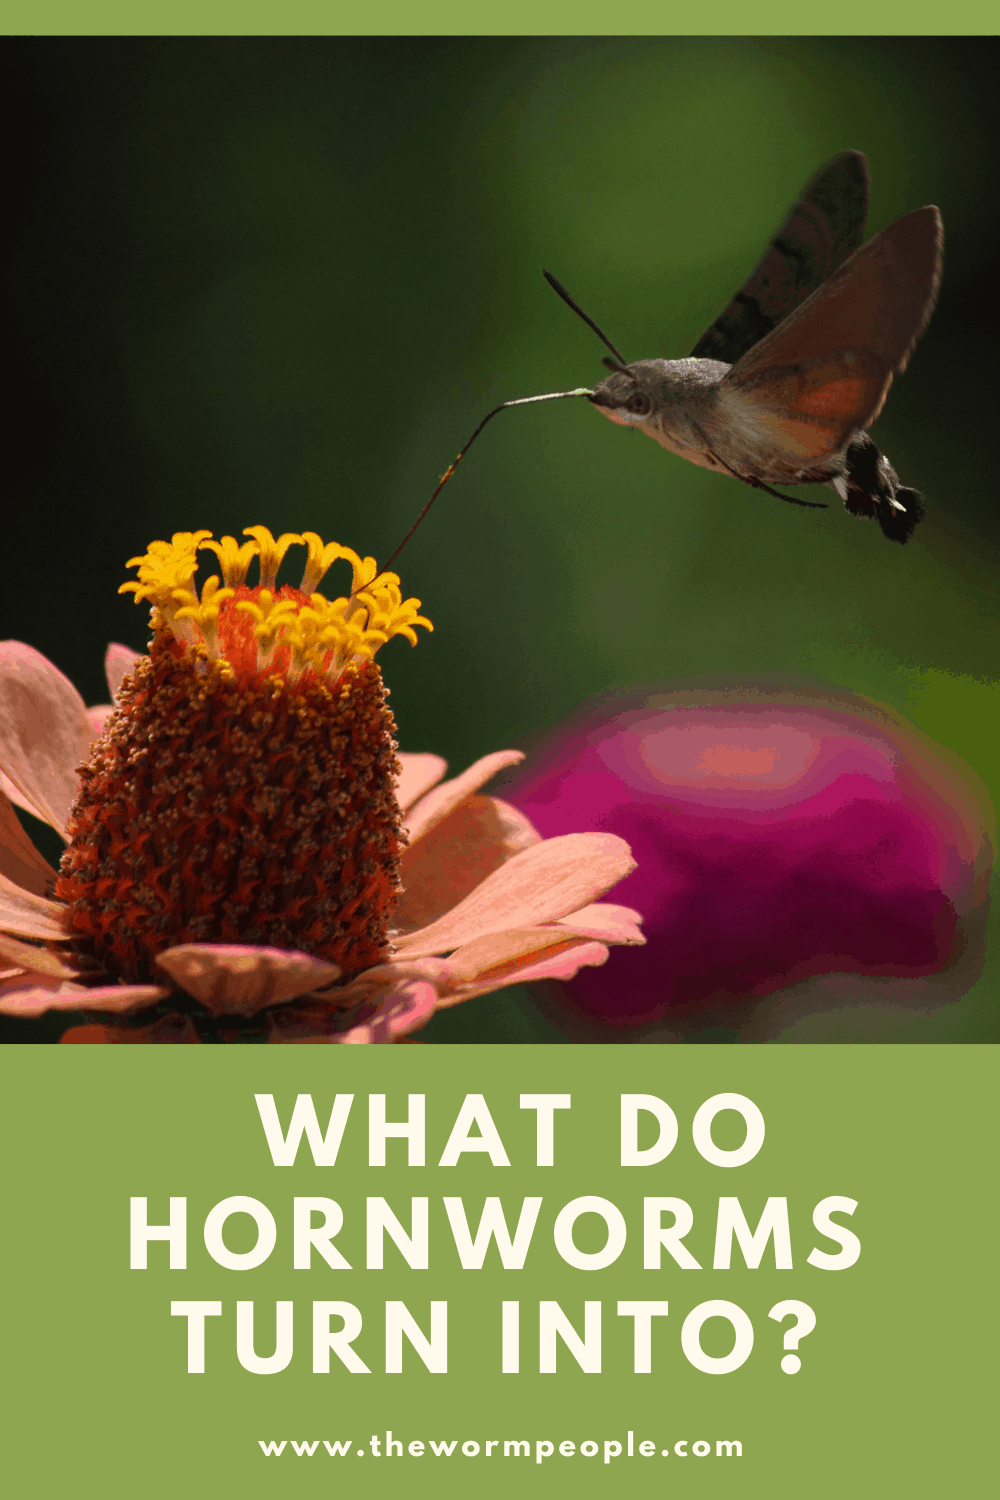 What do hornworms turn into